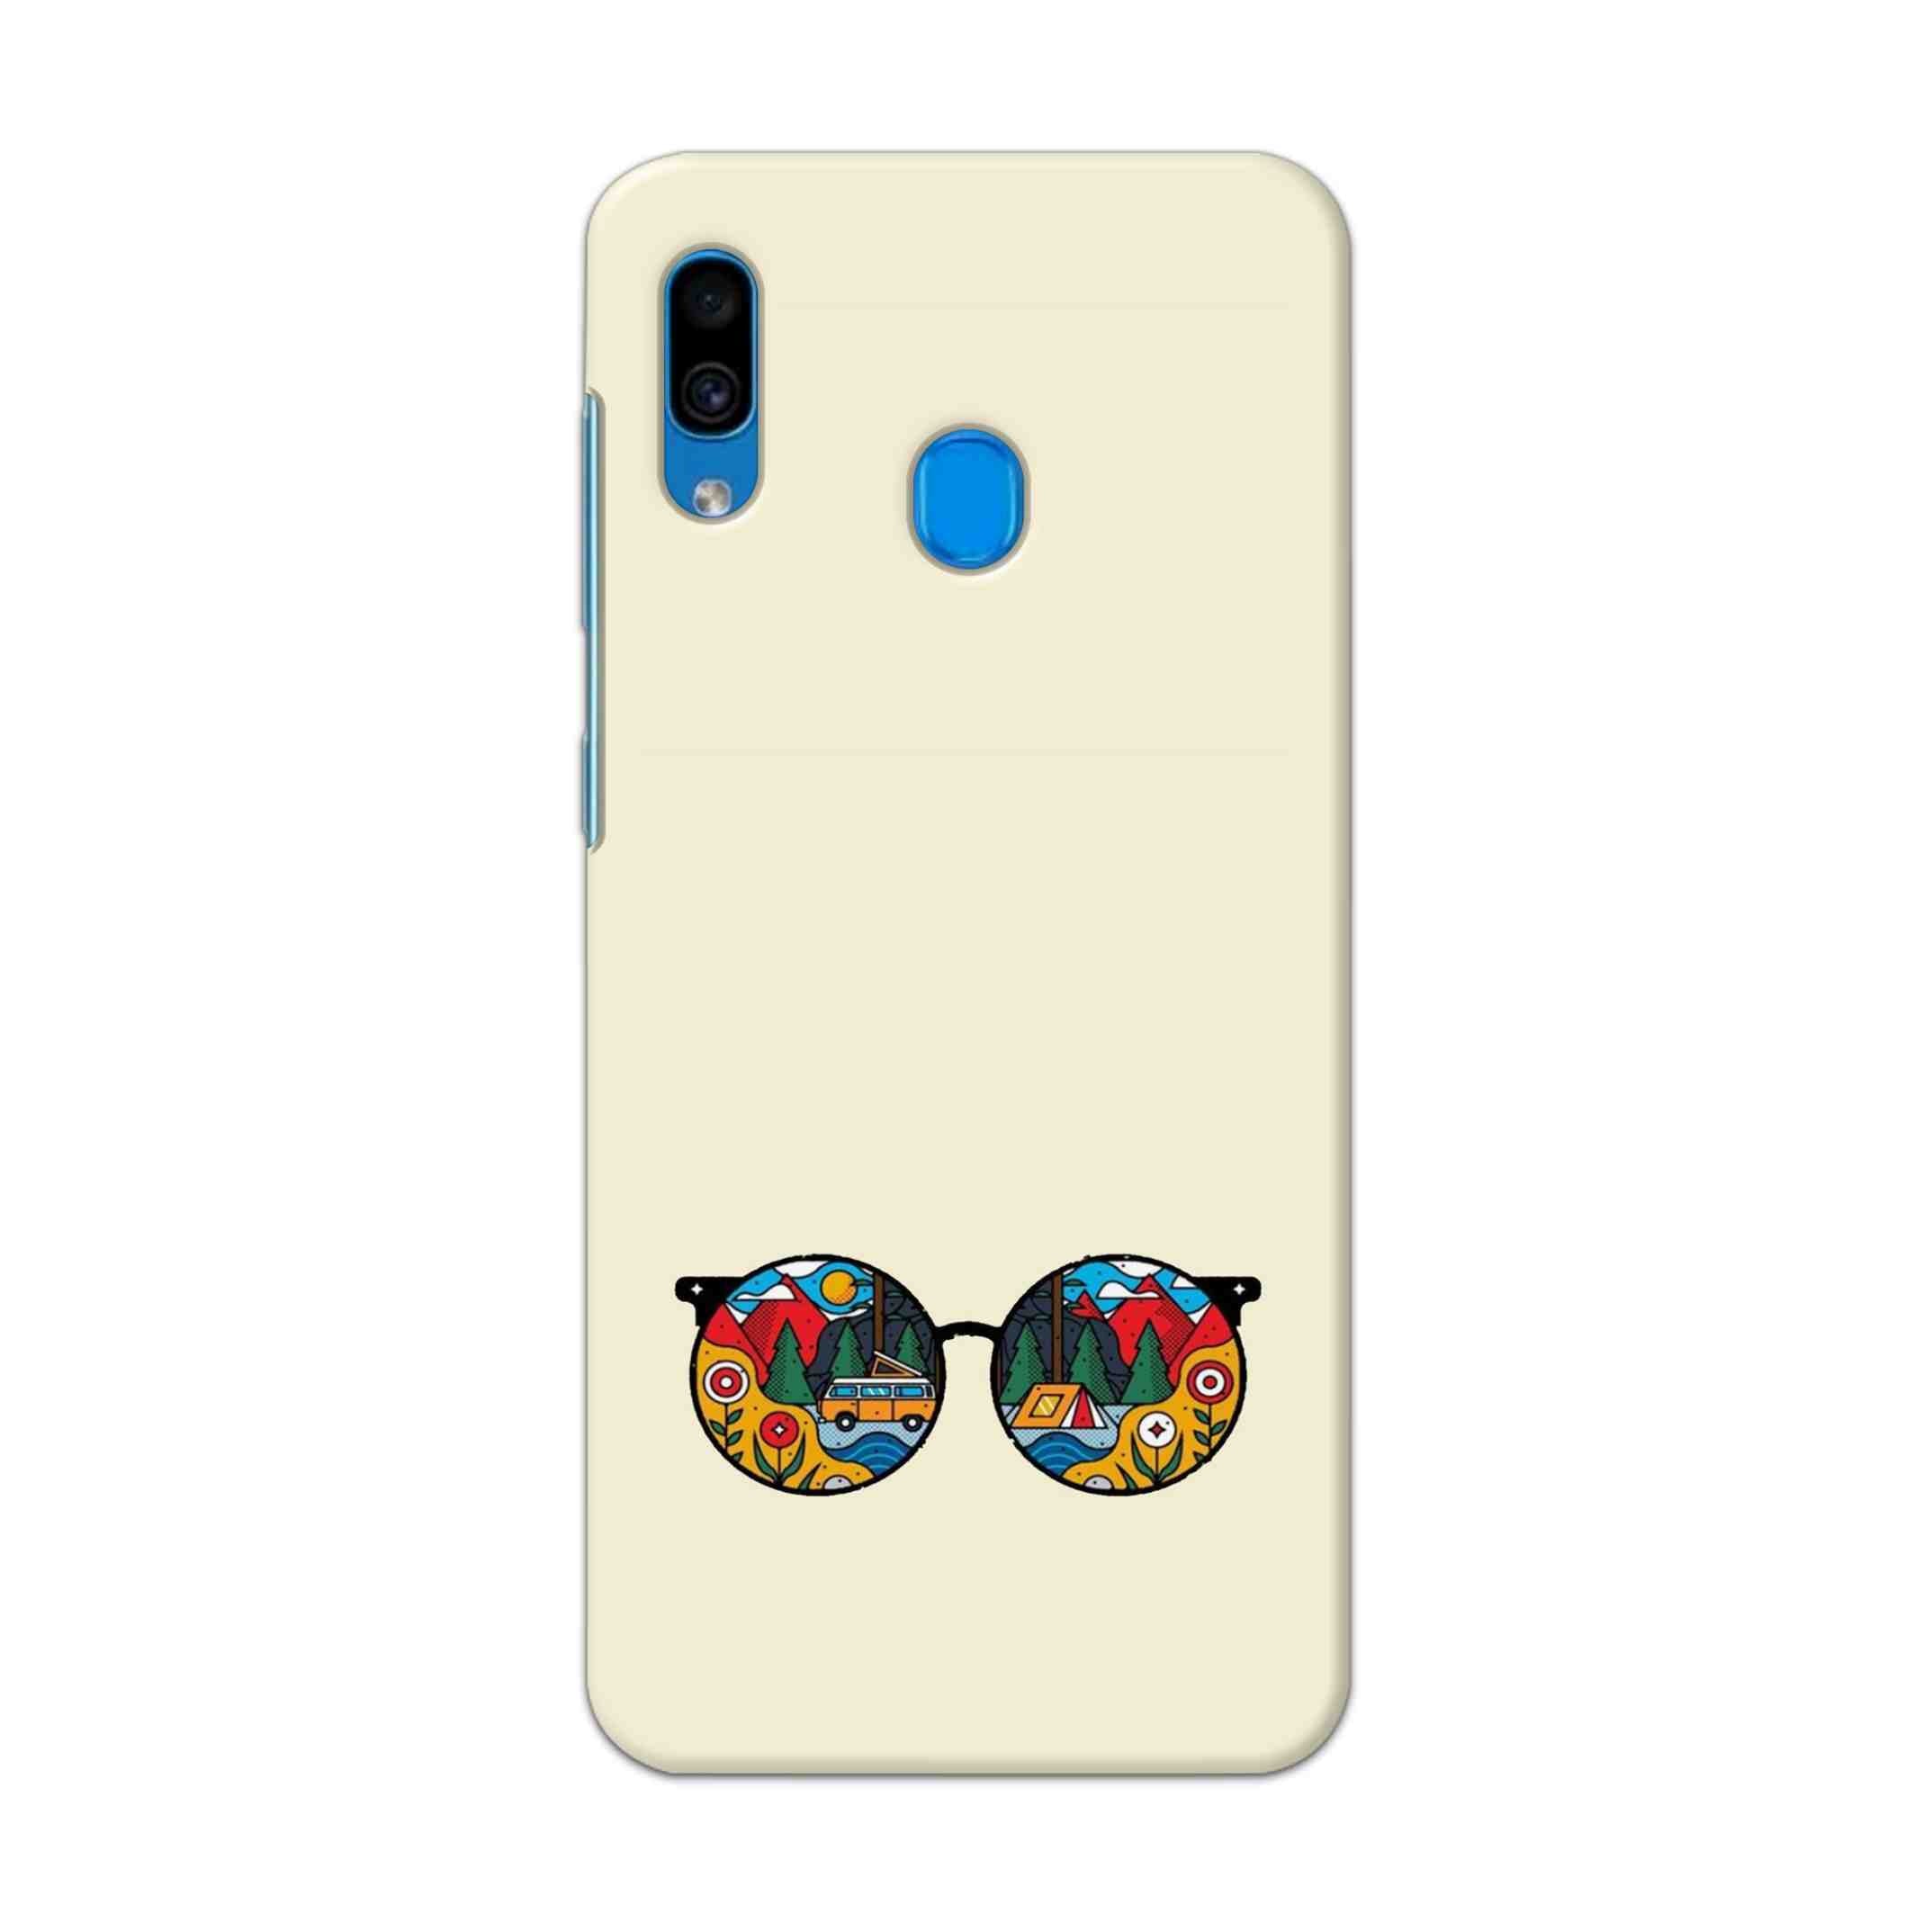 Buy Rainbow Sunglasses Hard Back Mobile Phone Case Cover For Samsung Galaxy A30 Online